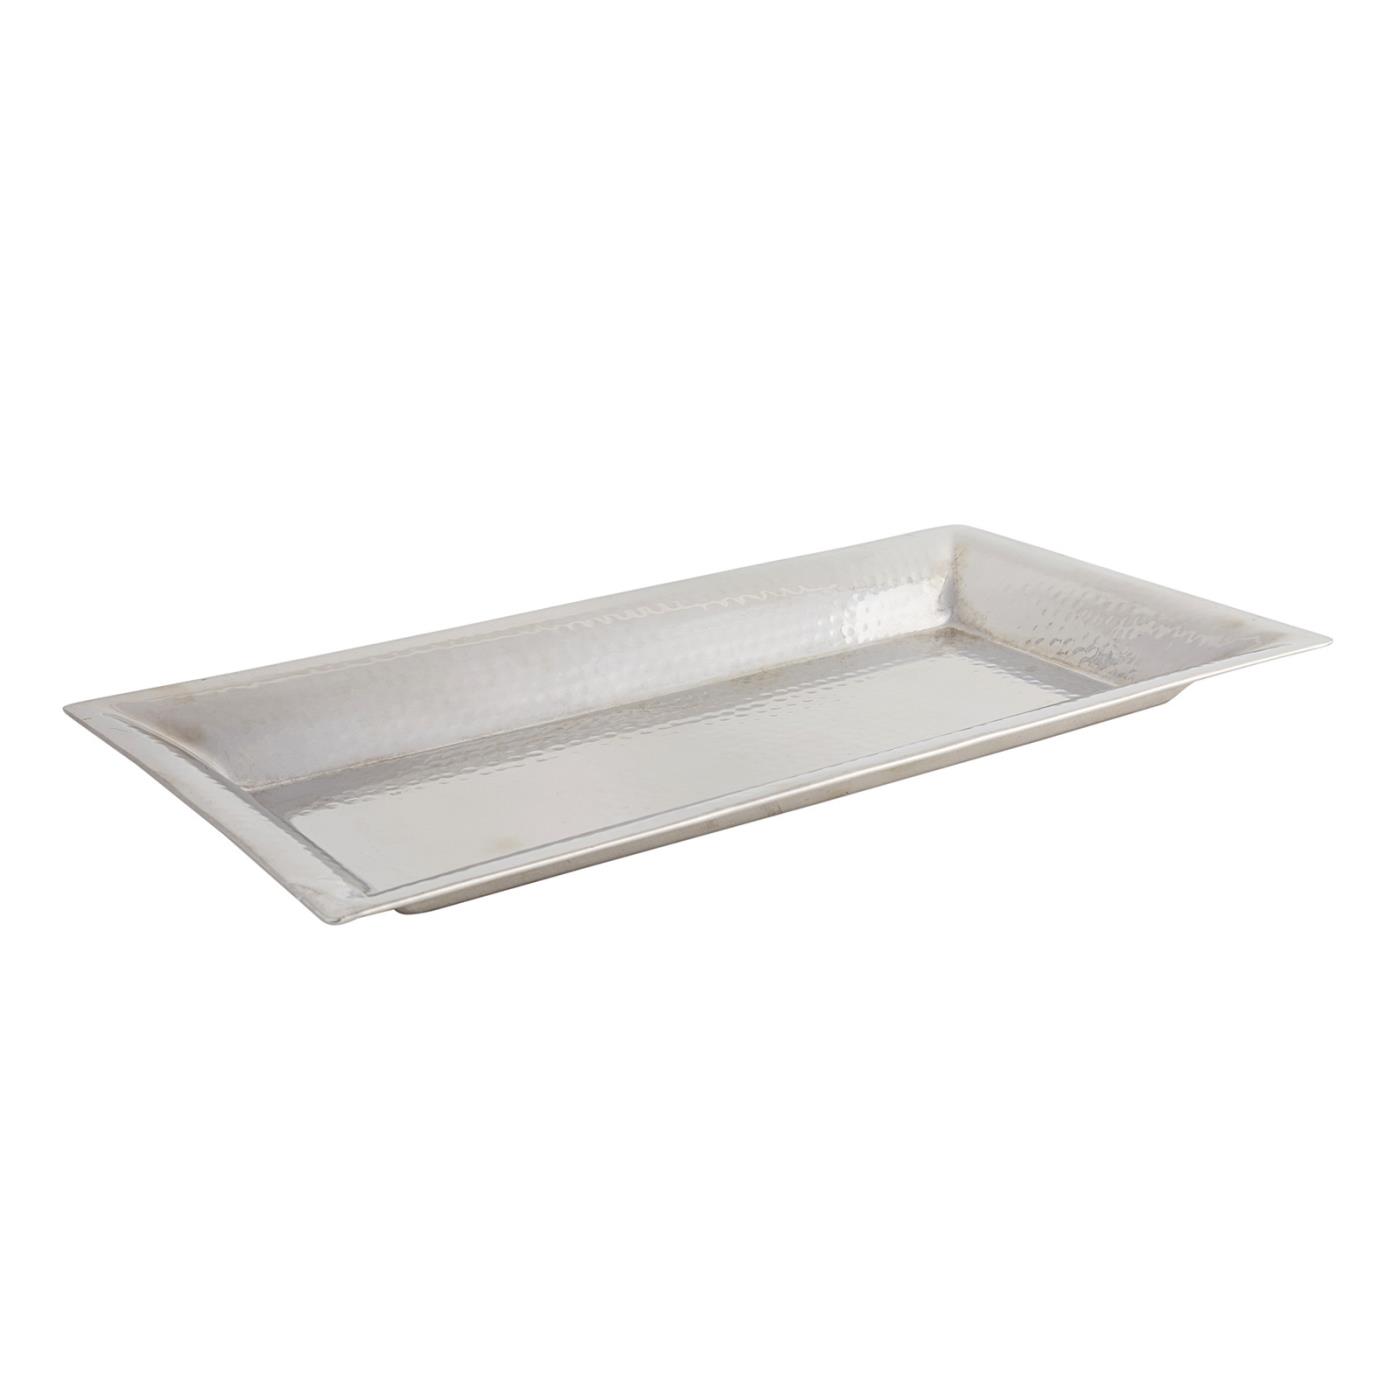 Hammered Rectangle Tray - 9.5" x 18.5"